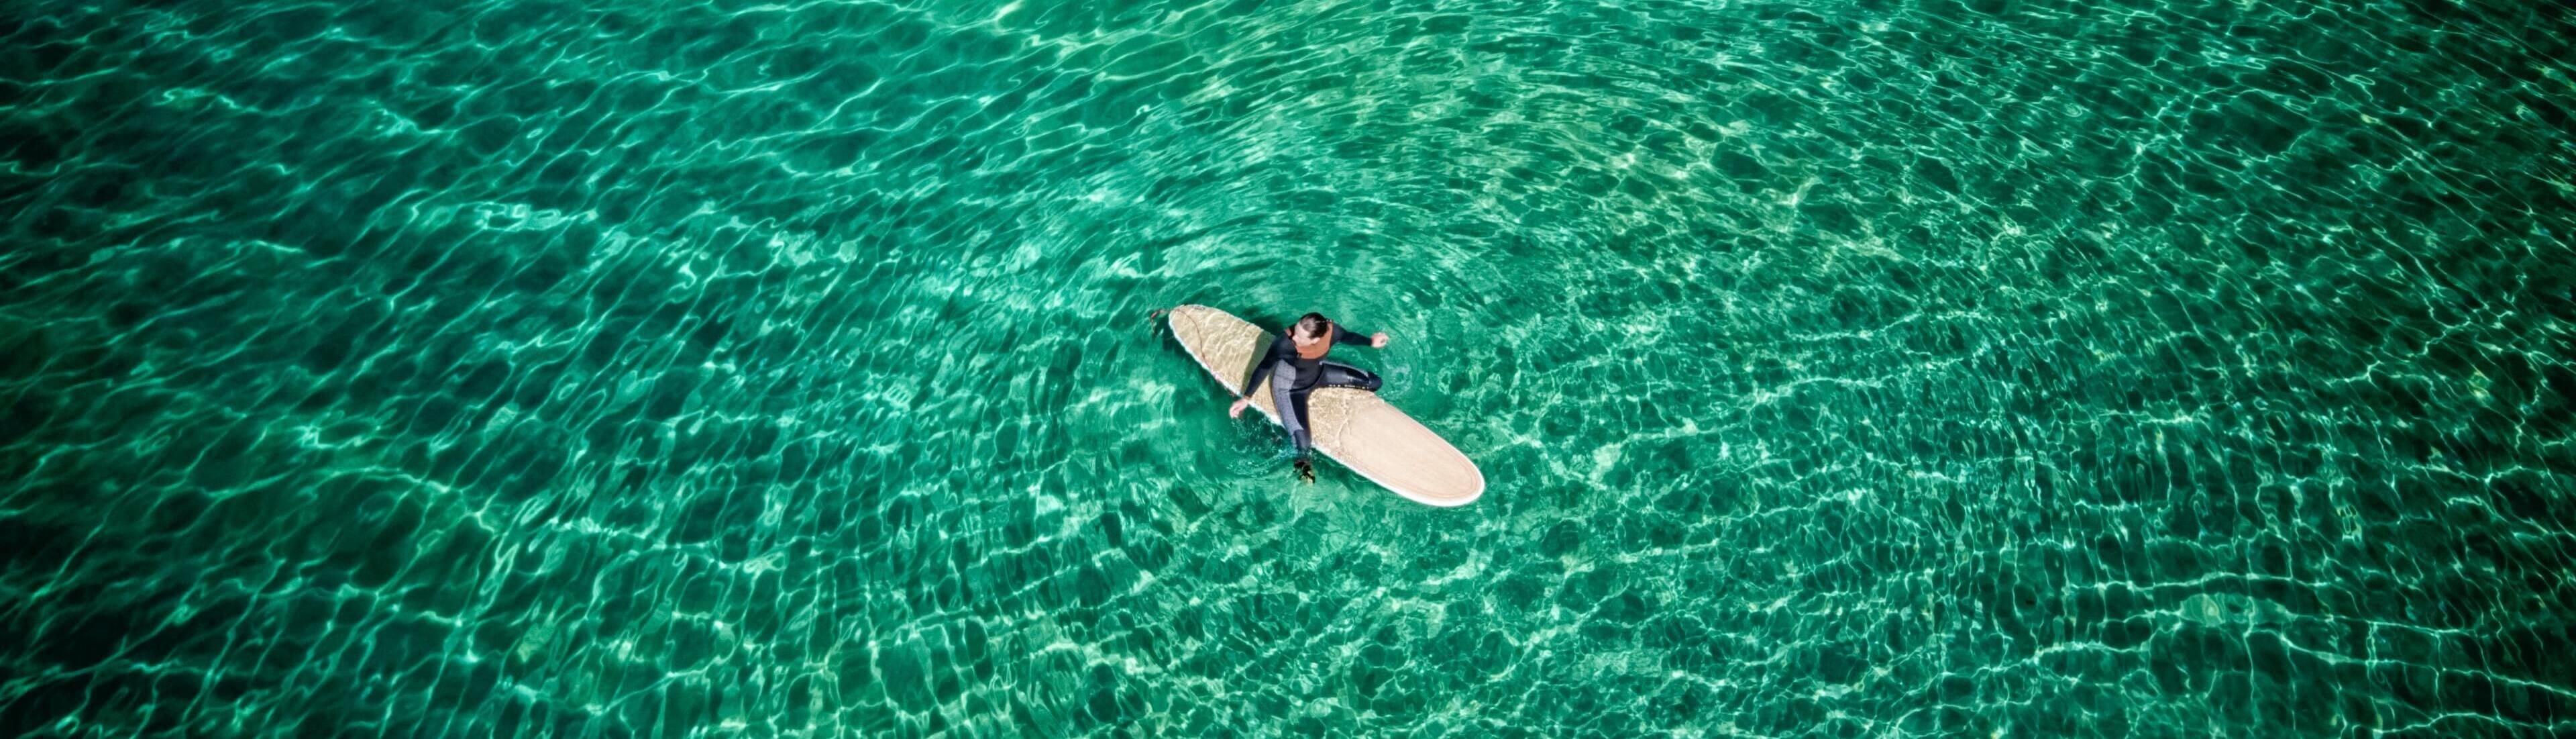 Person sitting on a long surfboard in green, calm water, viewed from above